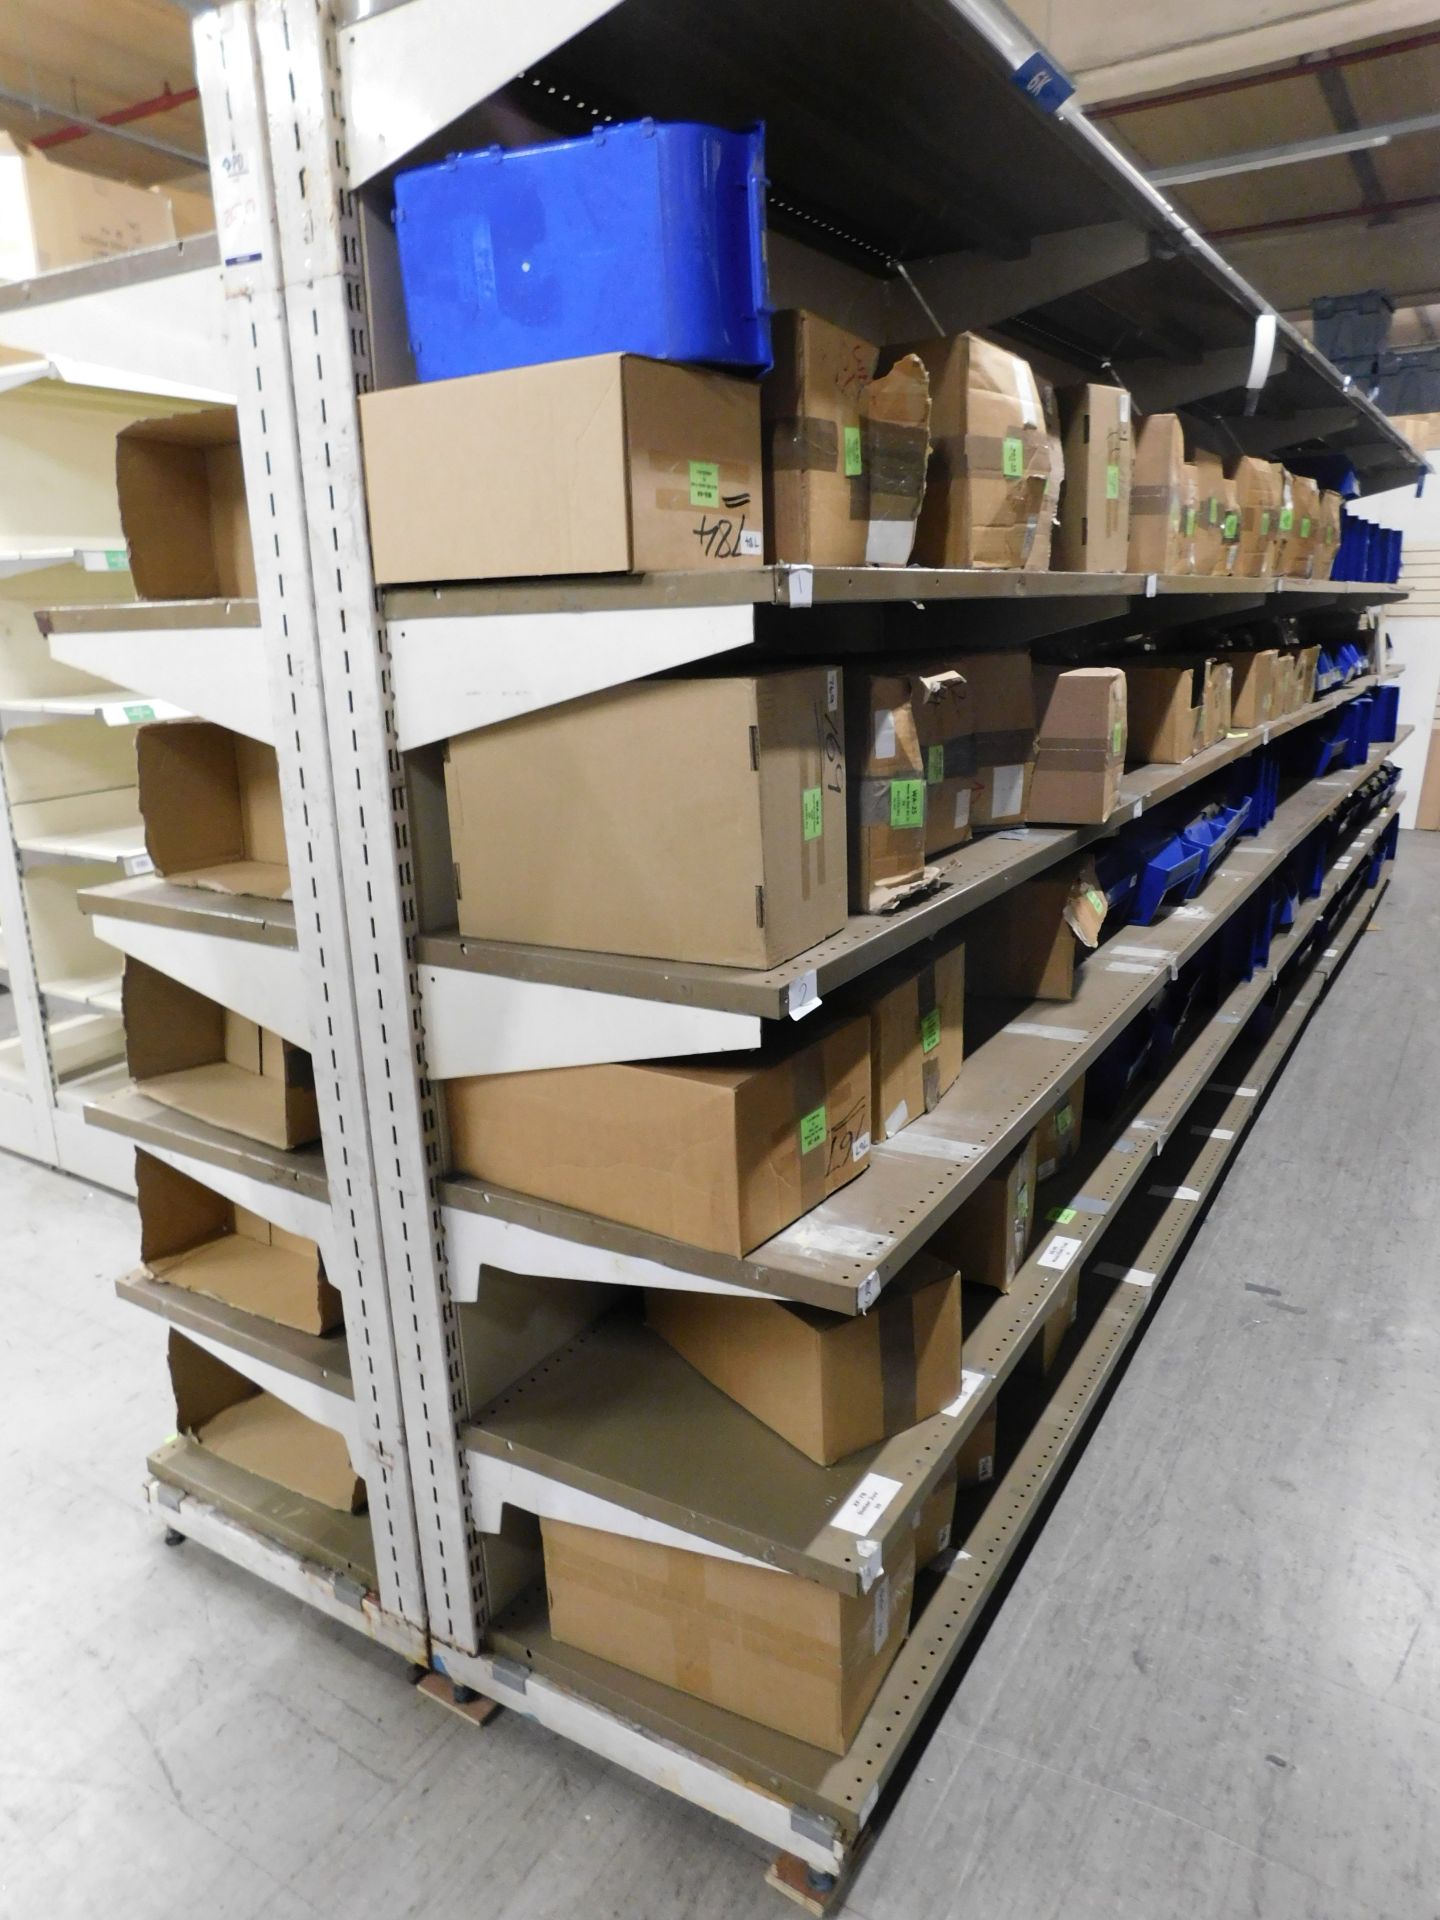 18 Bays of Gondola Double Sided Steel Shelving (Excluding Contents) & Quantity of Shelving - Image 4 of 12